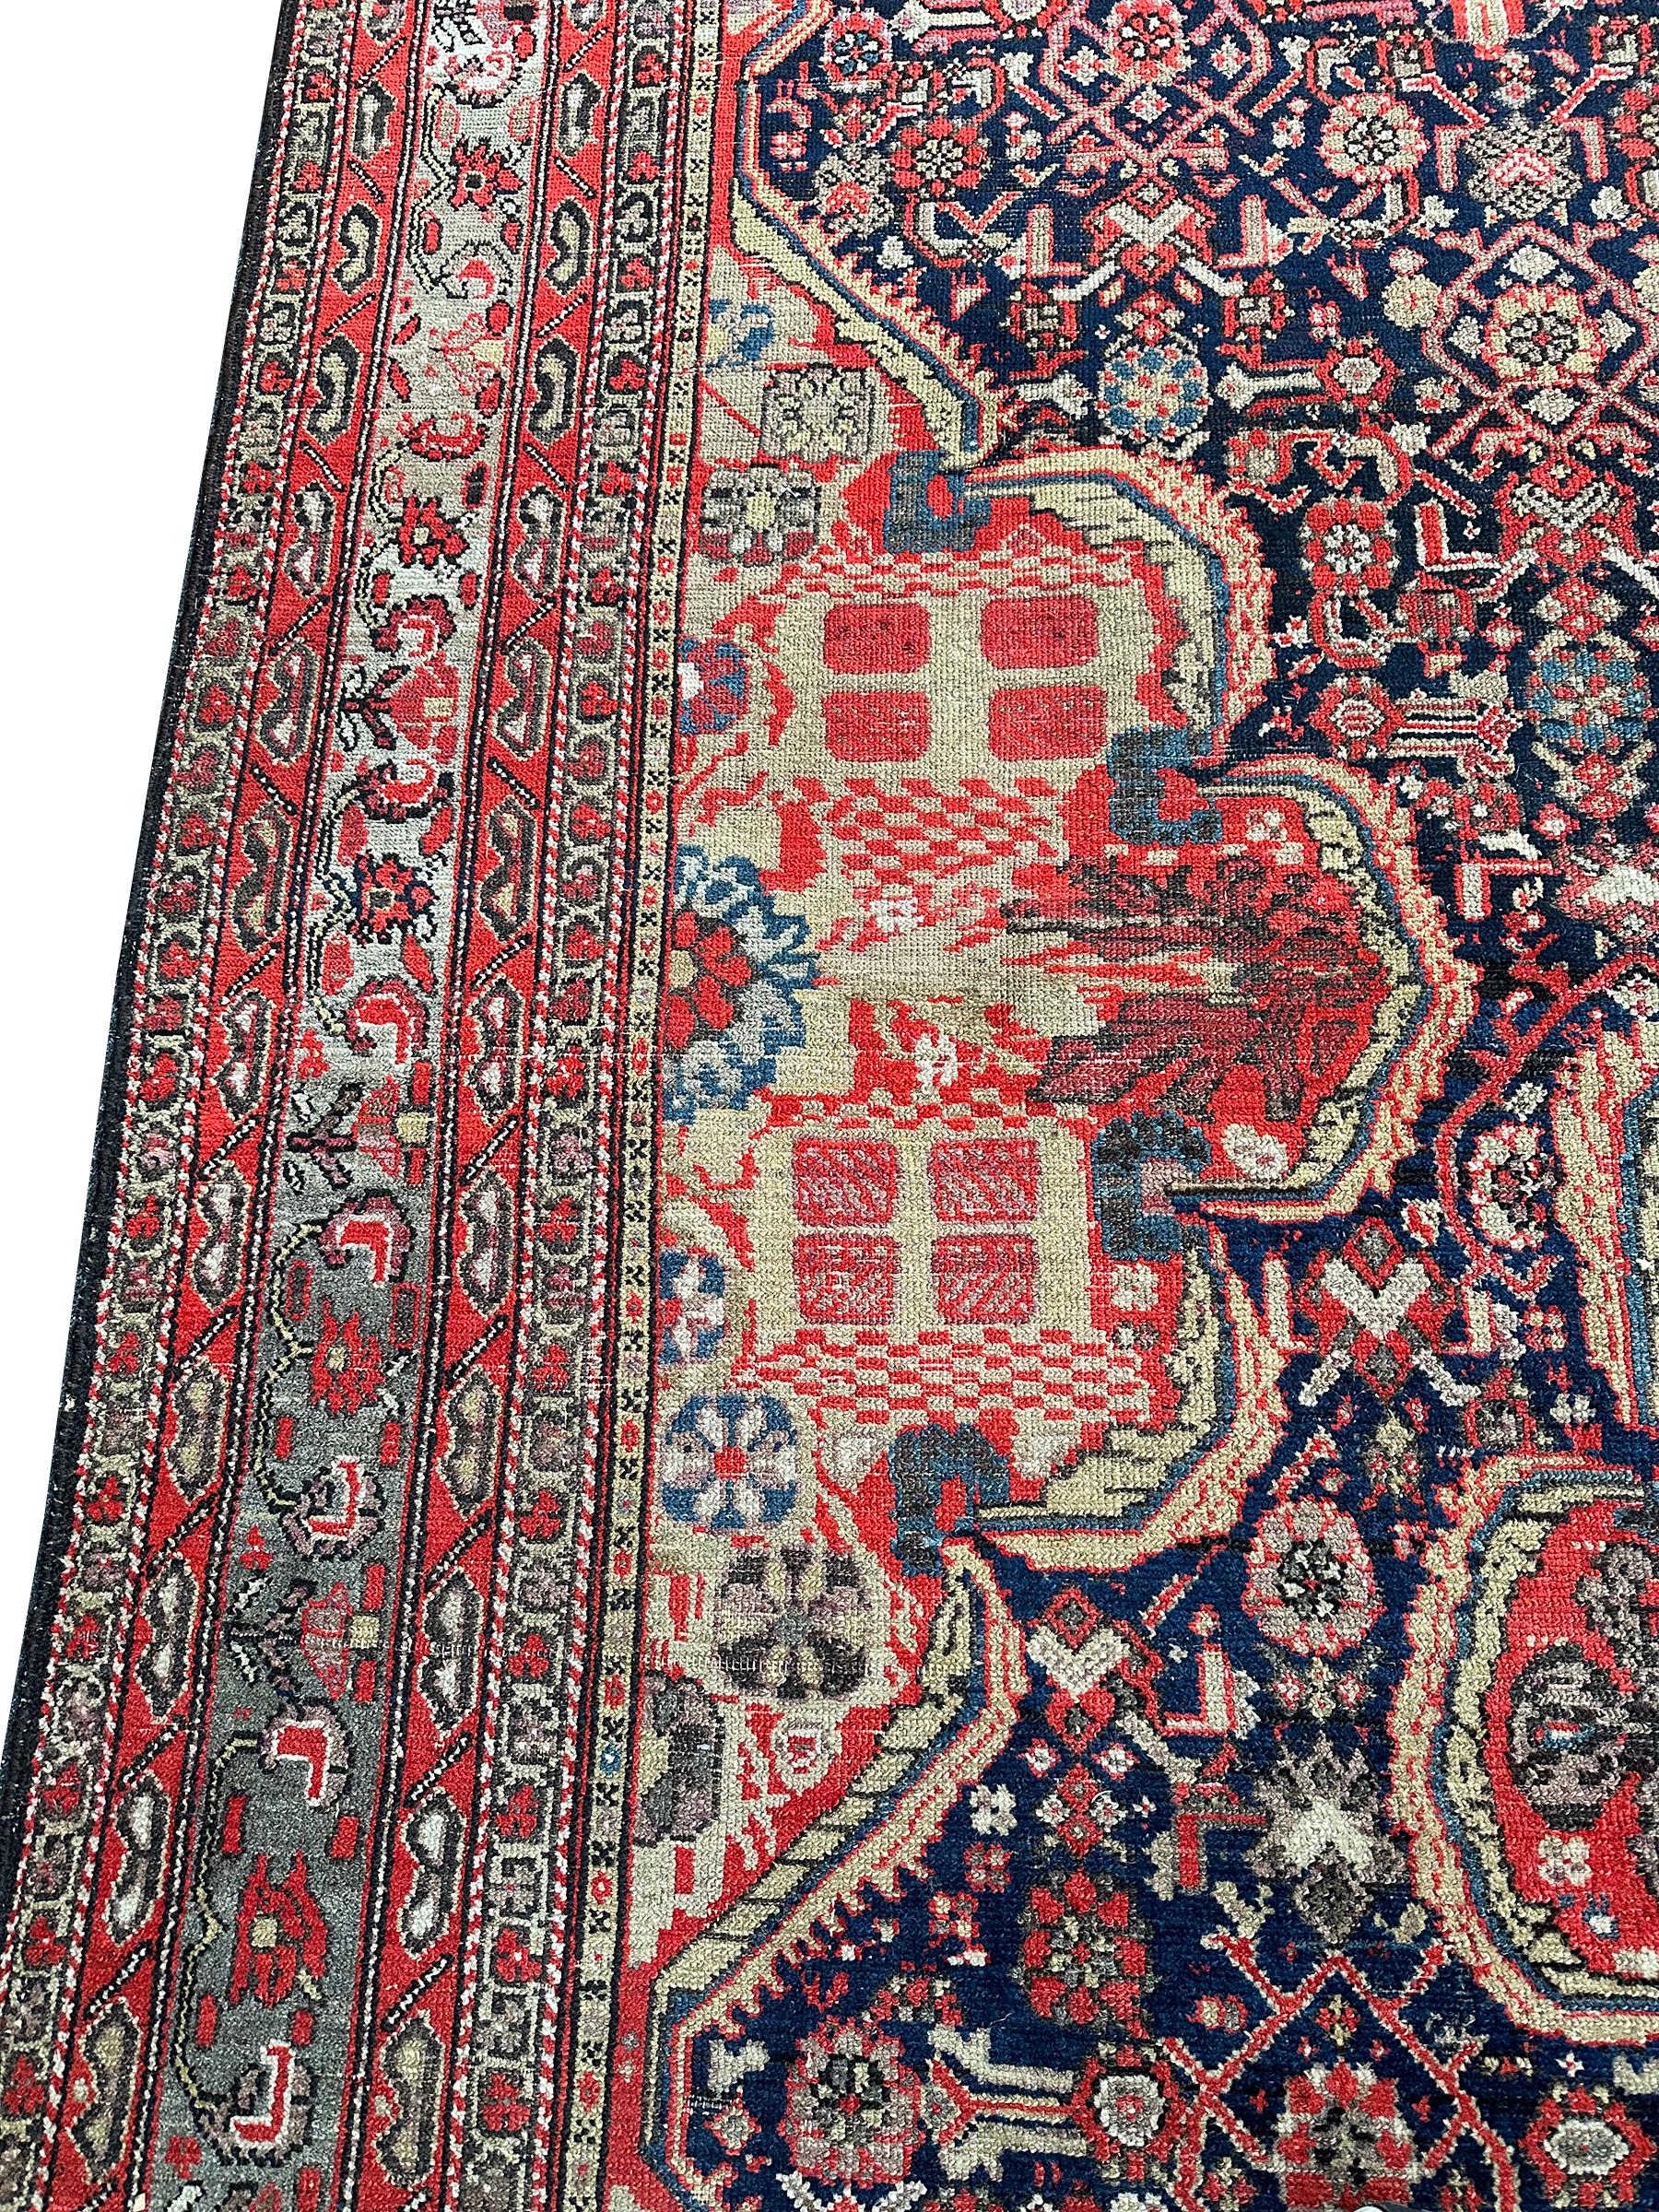 Late 19th Century Antique Persian Mahal Sultanabad Rug 1880 Geometric 9x17 Handmade 257cm x 511cm For Sale